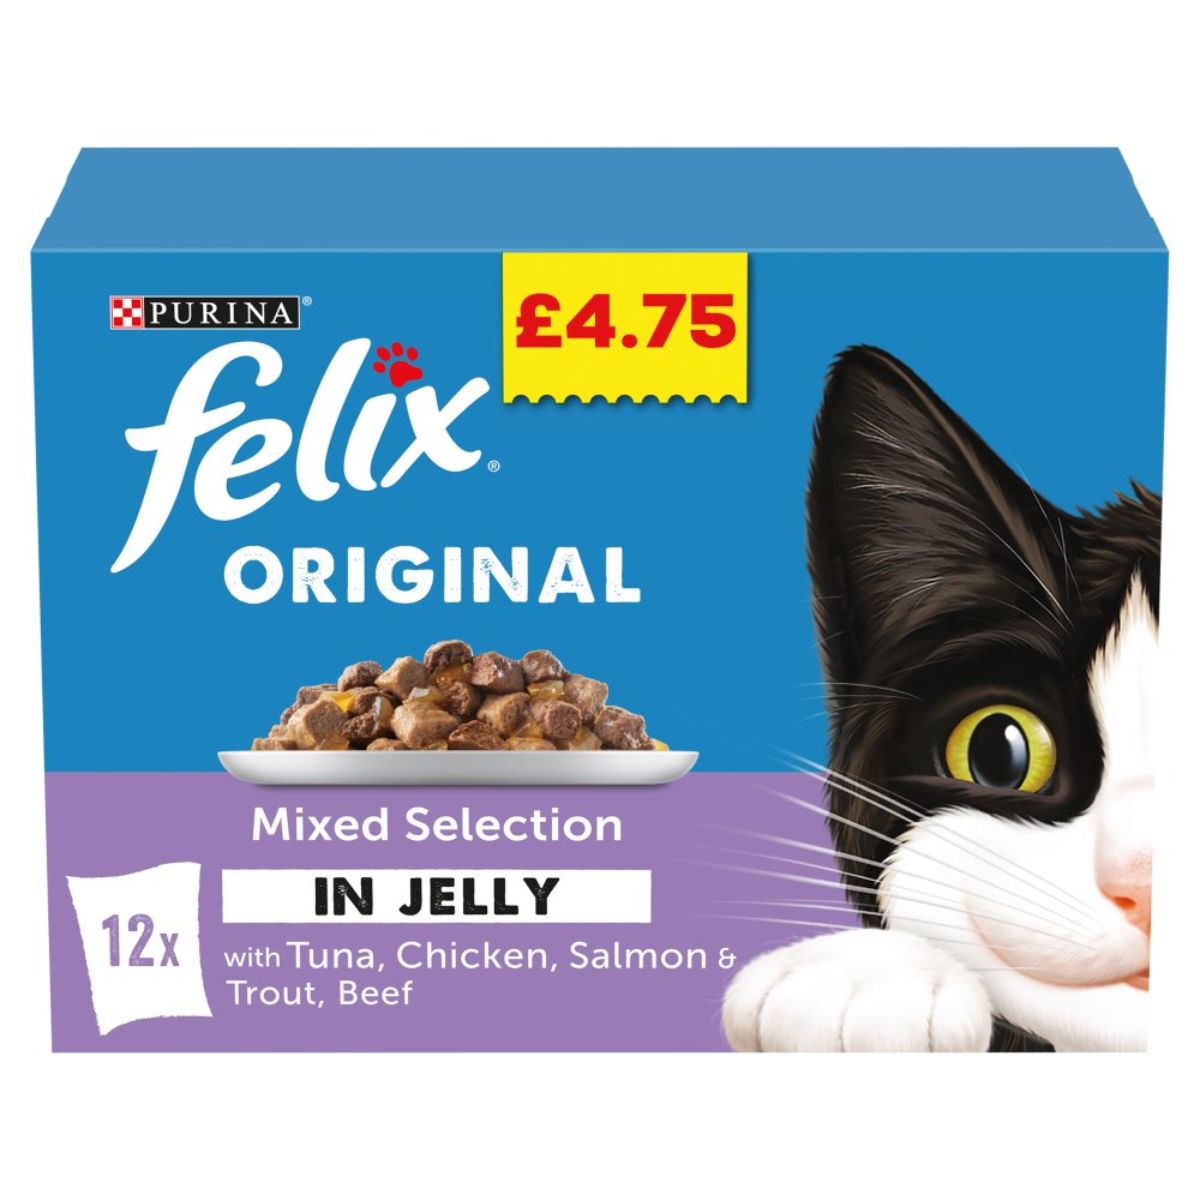 Felix - Original Mixed Selection in Jelly - 12 x 100g cat food.